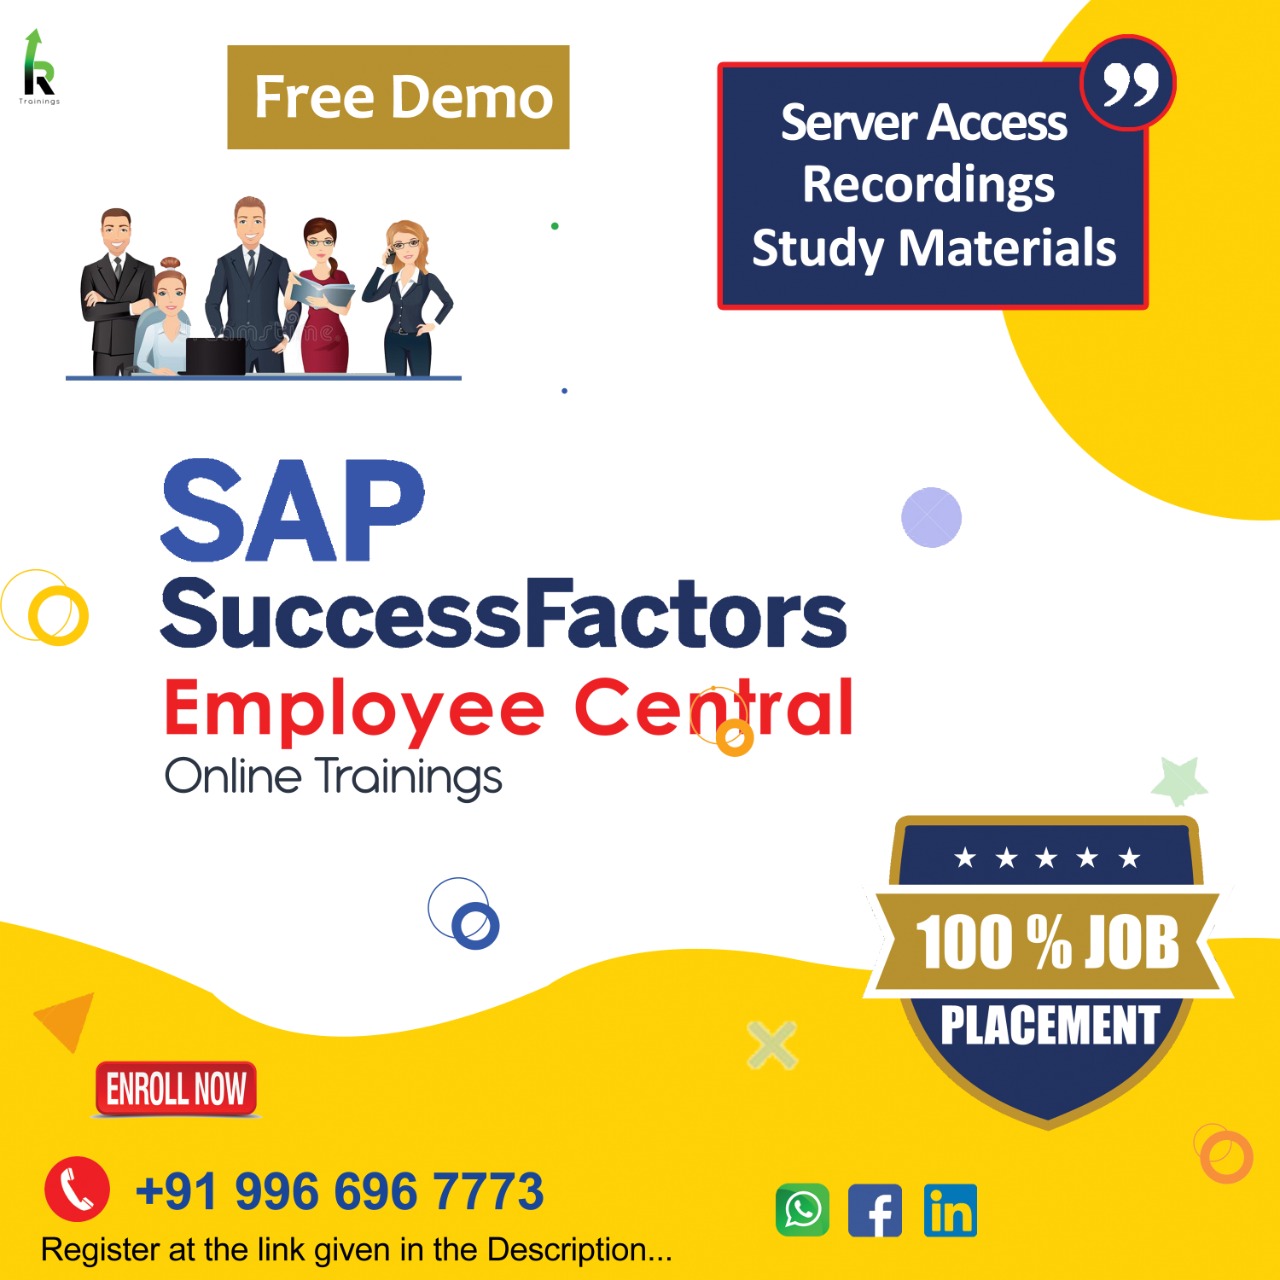 Best SAP Success Factors Employee Central Online Trainings in Hyderabad...Education and LearningCoaching ClassesAll Indiaother